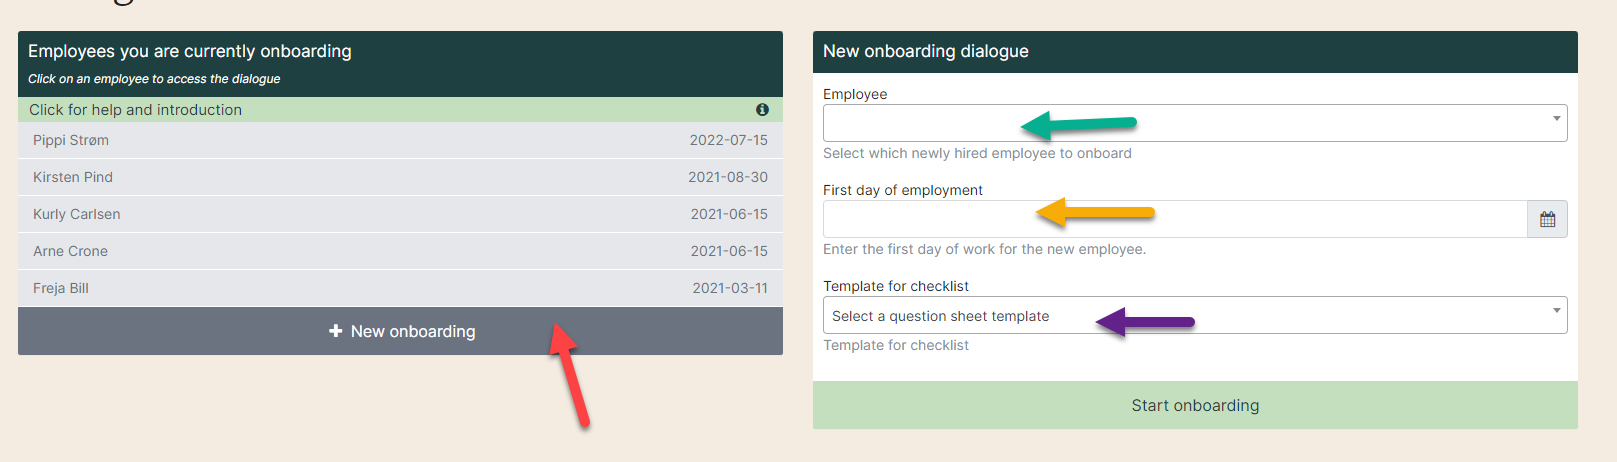 onboarding overview